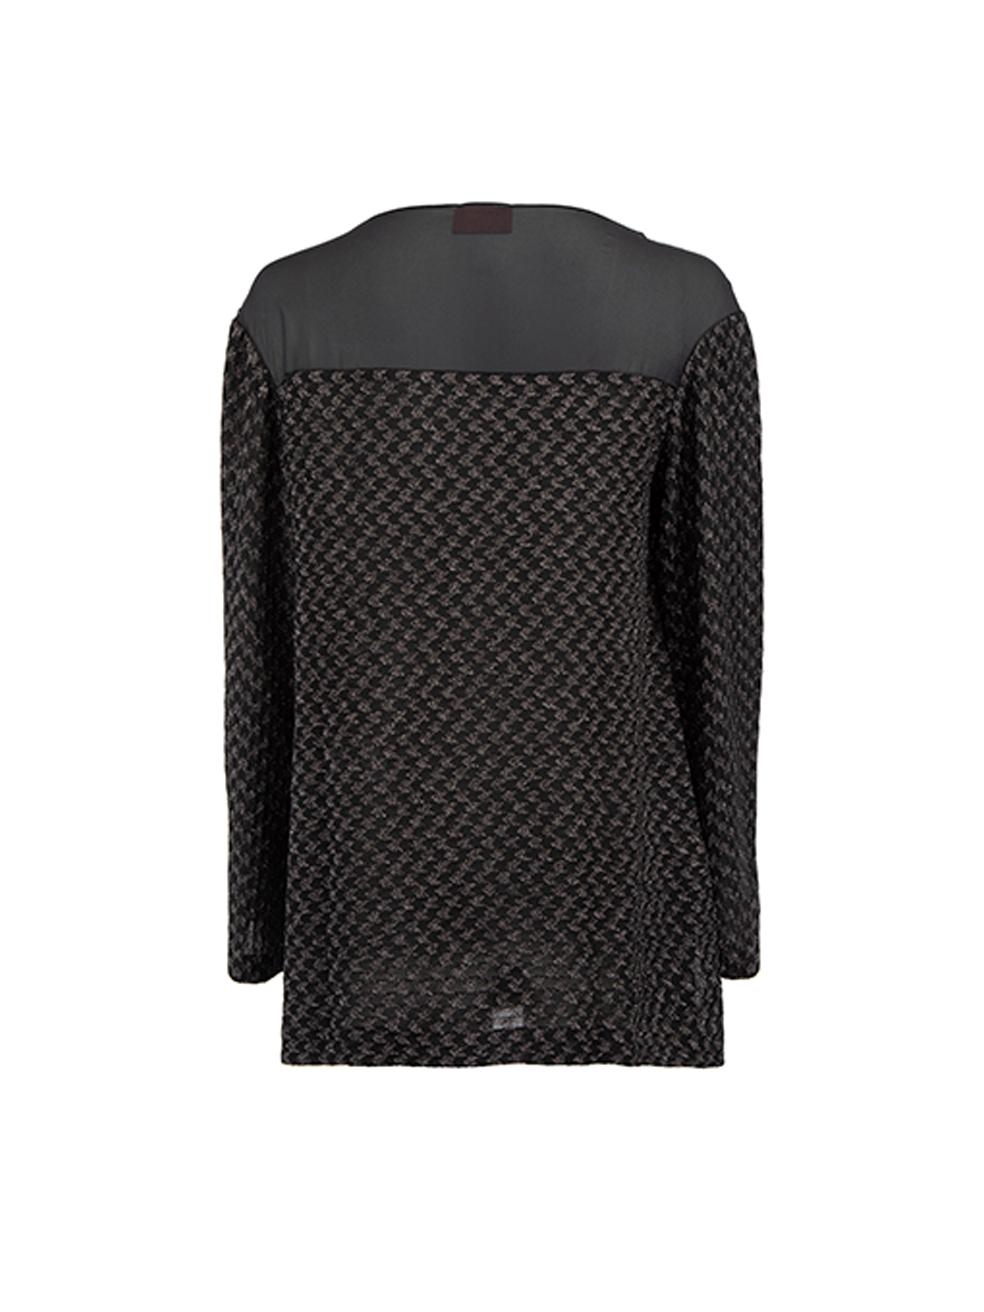 Black Mesh Neckline Metallic Houndstooth Top Size XL In Good Condition For Sale In London, GB